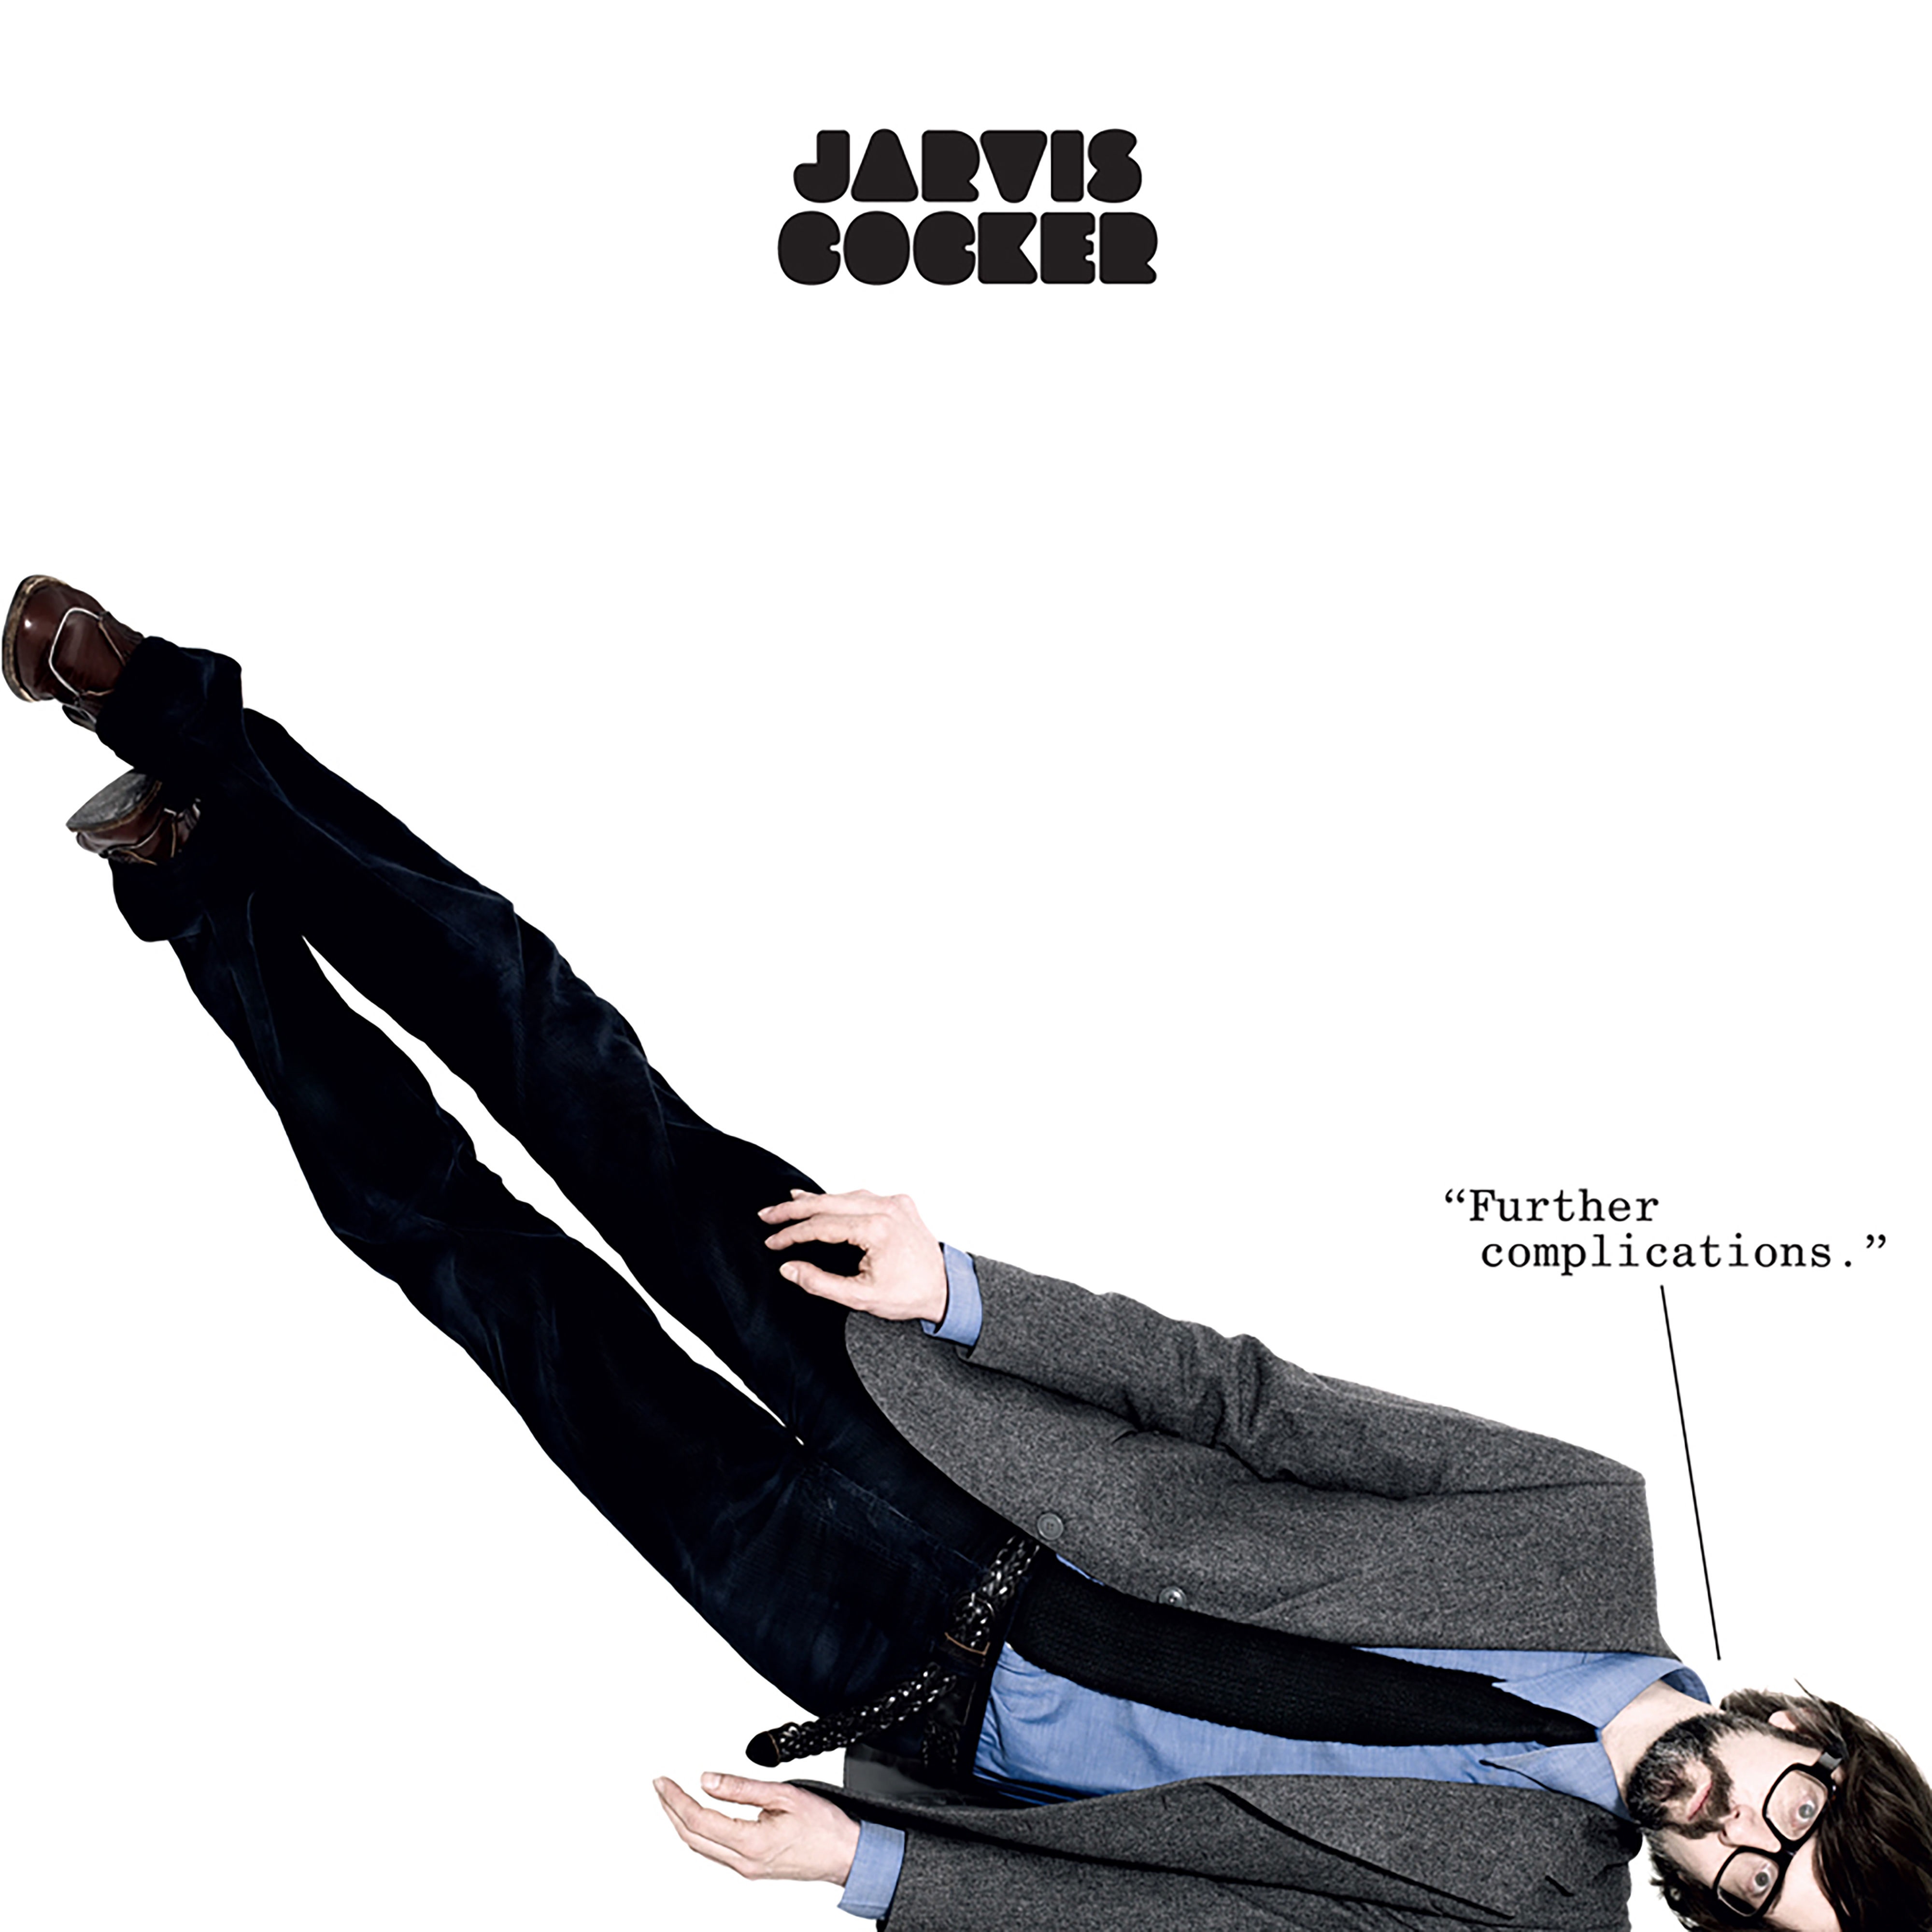 Jarvis Cocker – Further Complications (Remastered) (2009/2020) [FLAC 24bit/44,1kHz]